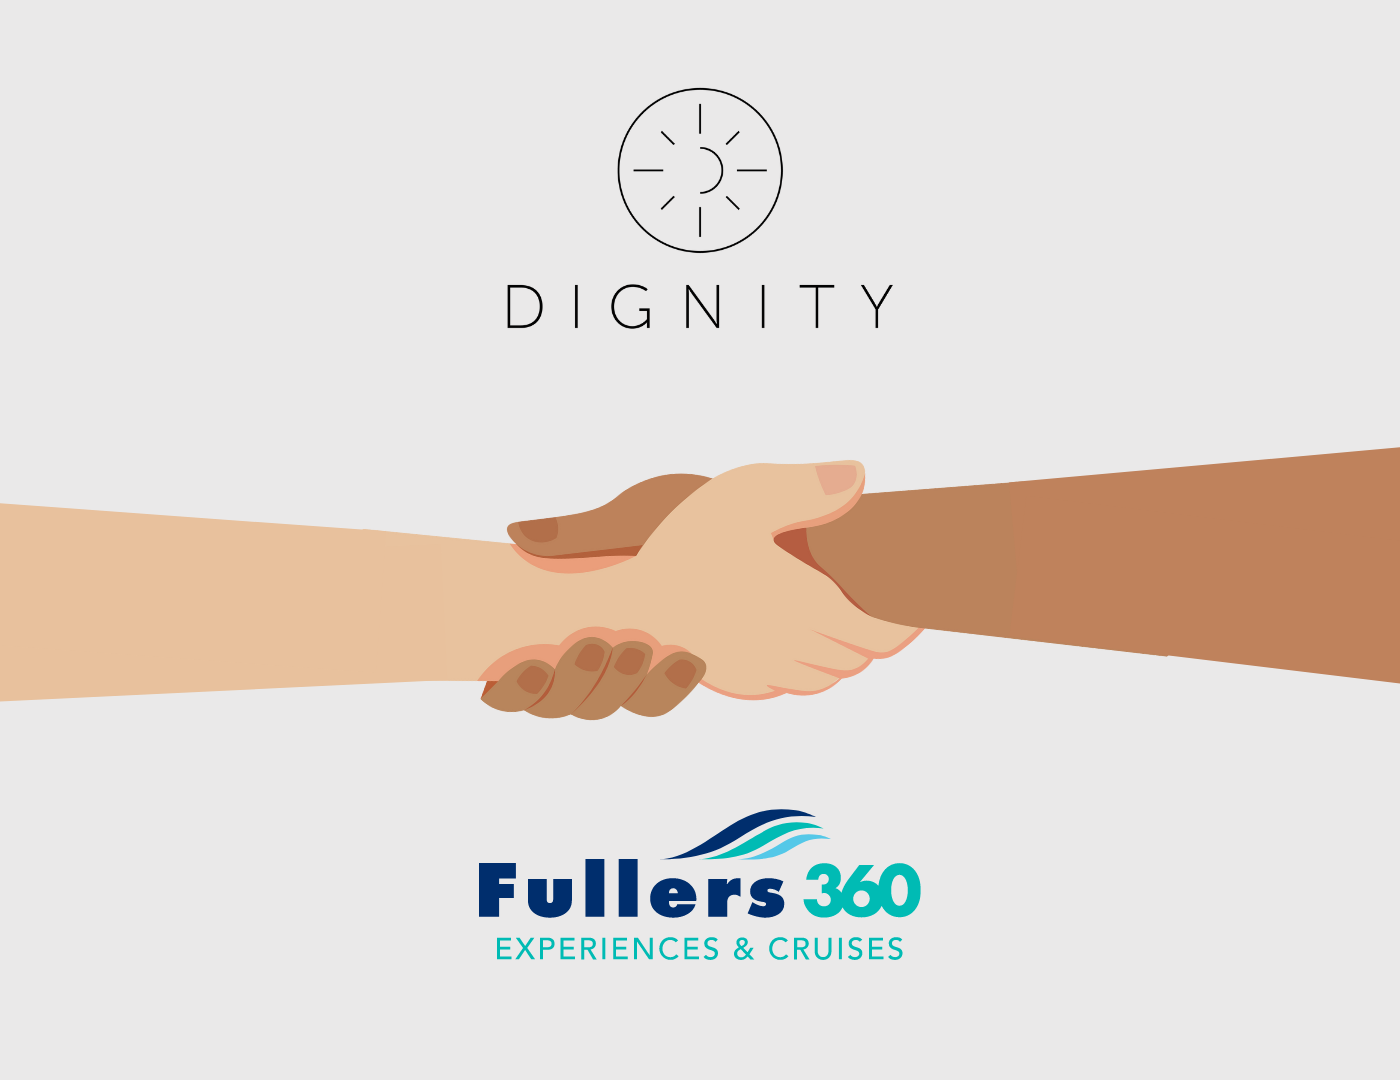 Welcoming Fullers as an Impact Partner through our Buy-one, Give-one initiative!